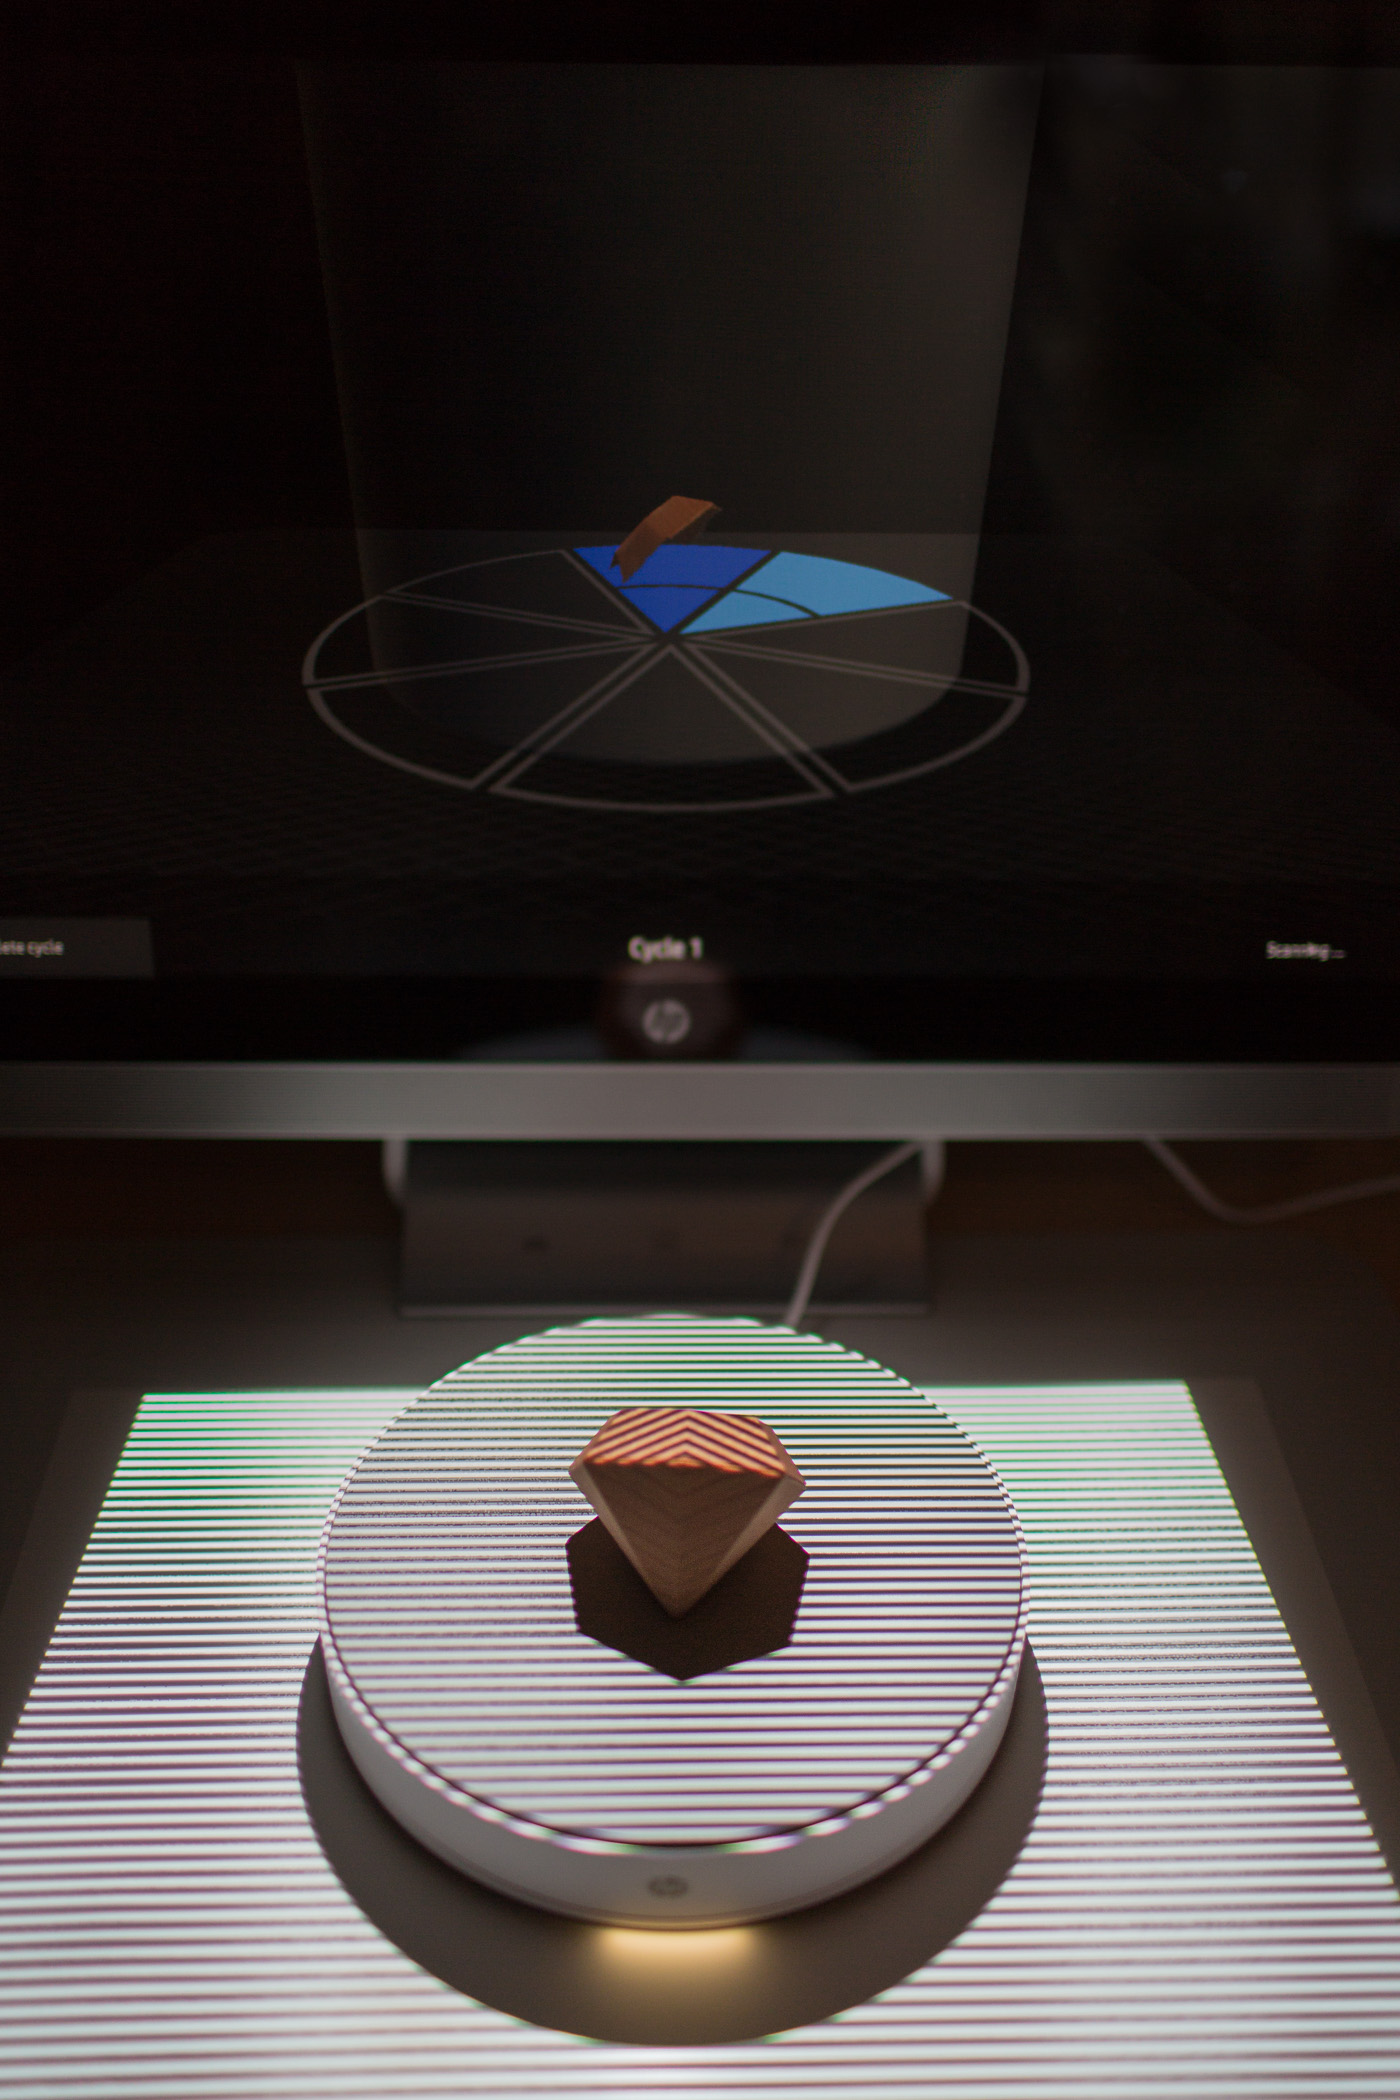 HP Sprout, a 3D Desktop with 3D Scanner technology